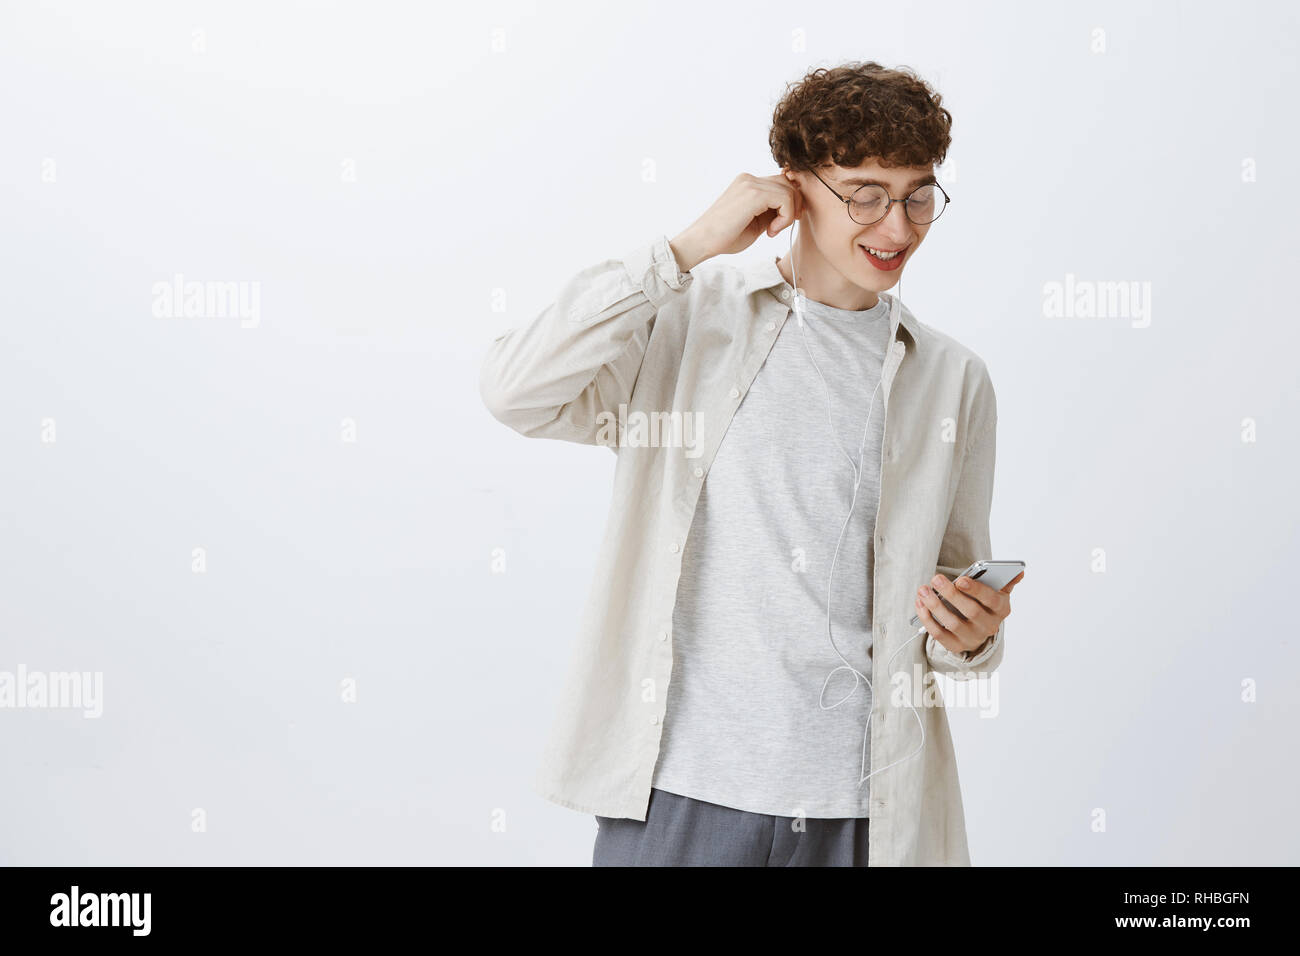 Portrait Of Stylish Modern Hipset Guy With Curly Hair In